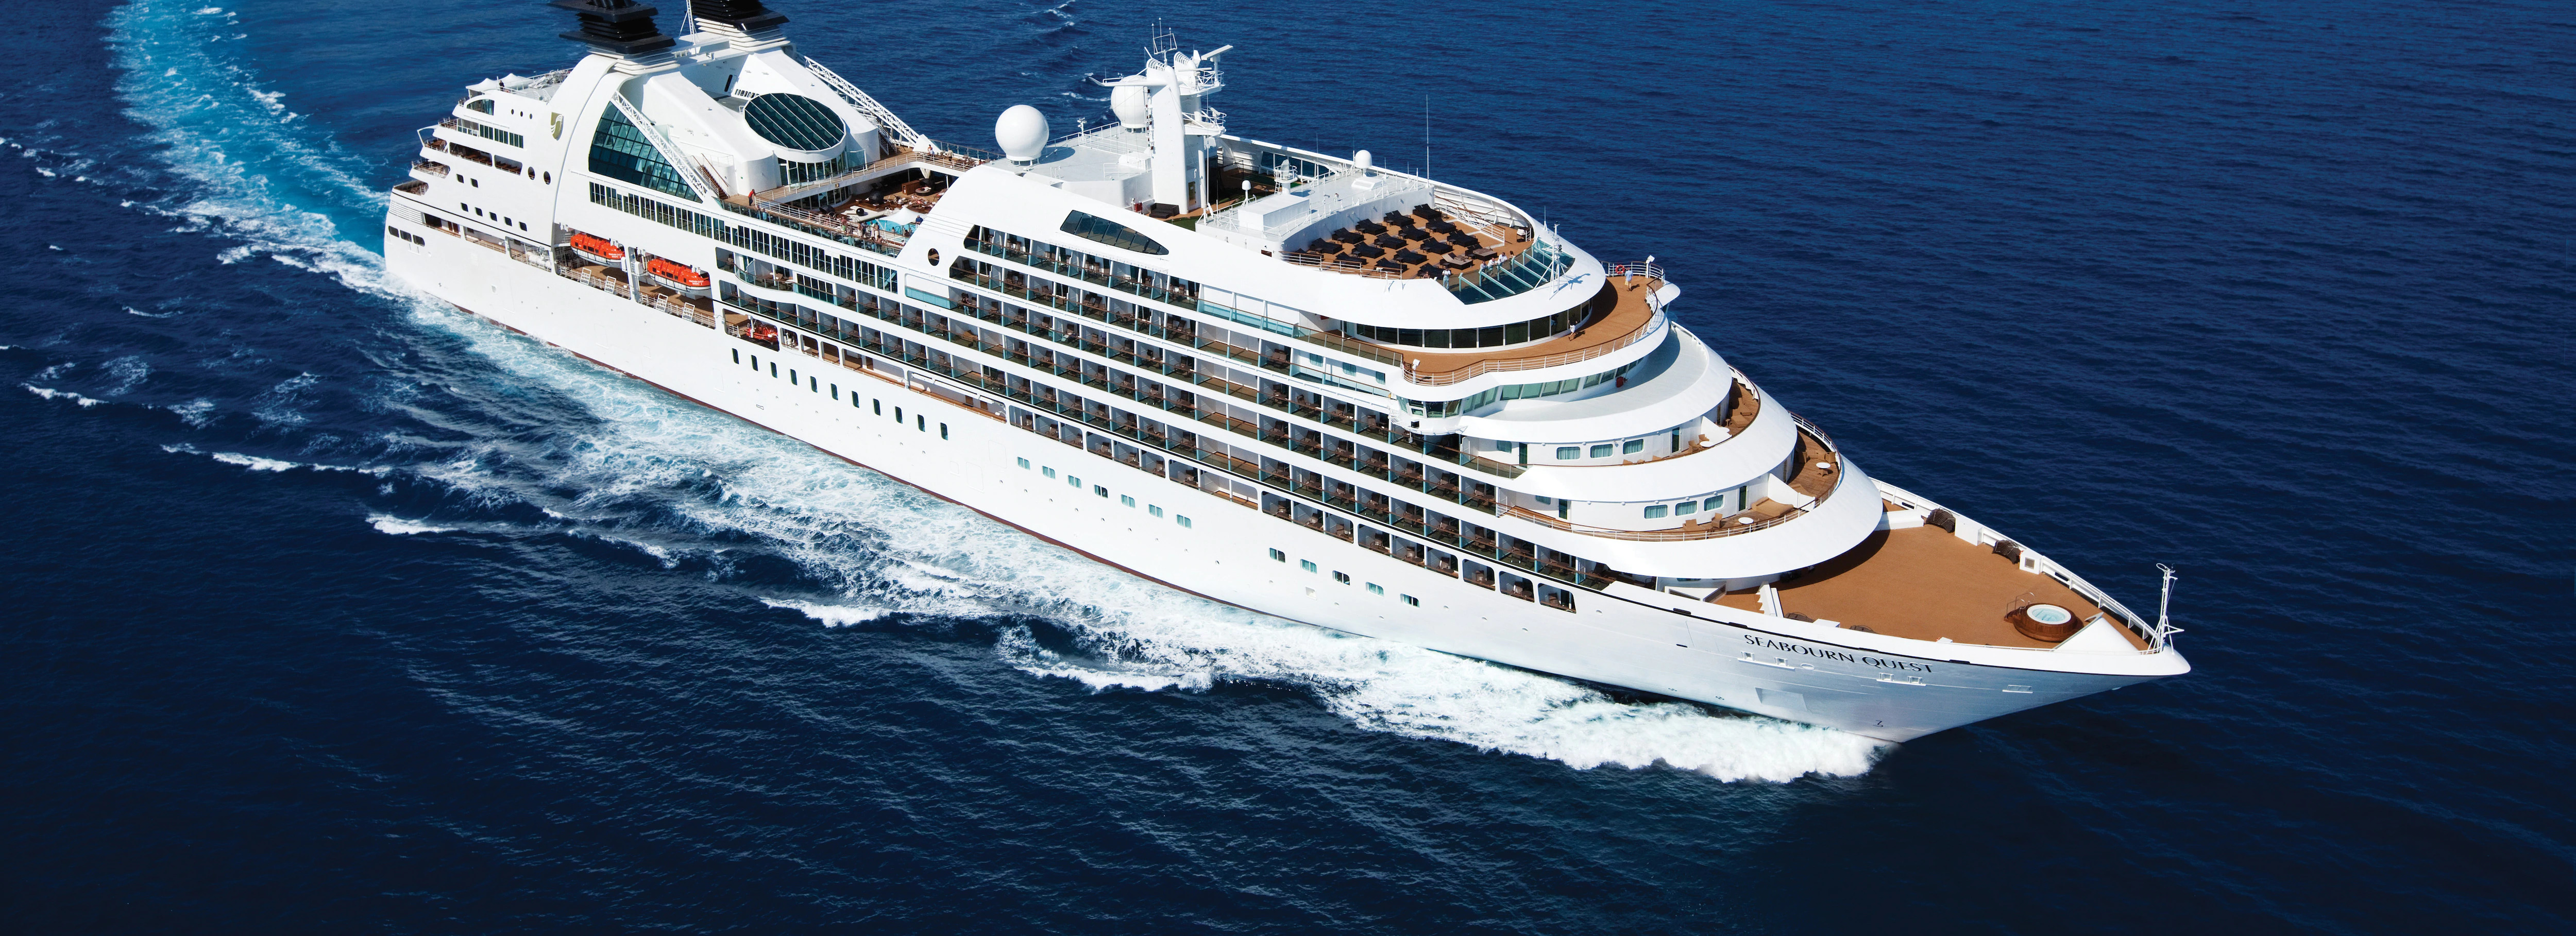 seabourn cruises cancellation policy